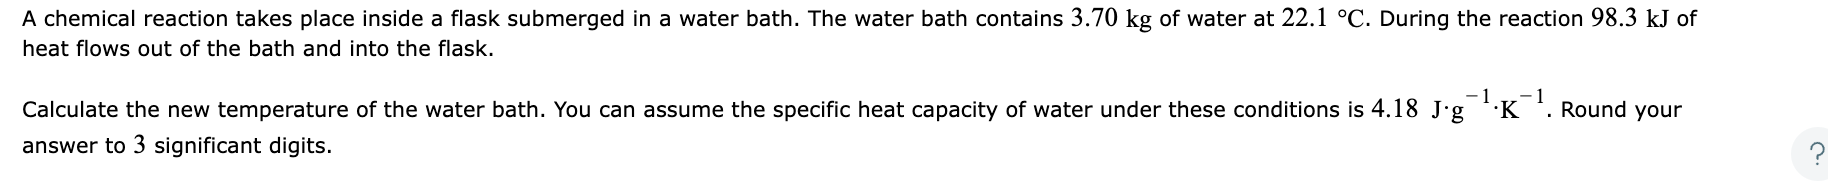 A chemical reaction takes place inside a flask submerged in a water bath. The water bath contains \( 3.70 \mathrm{~kg} \) of